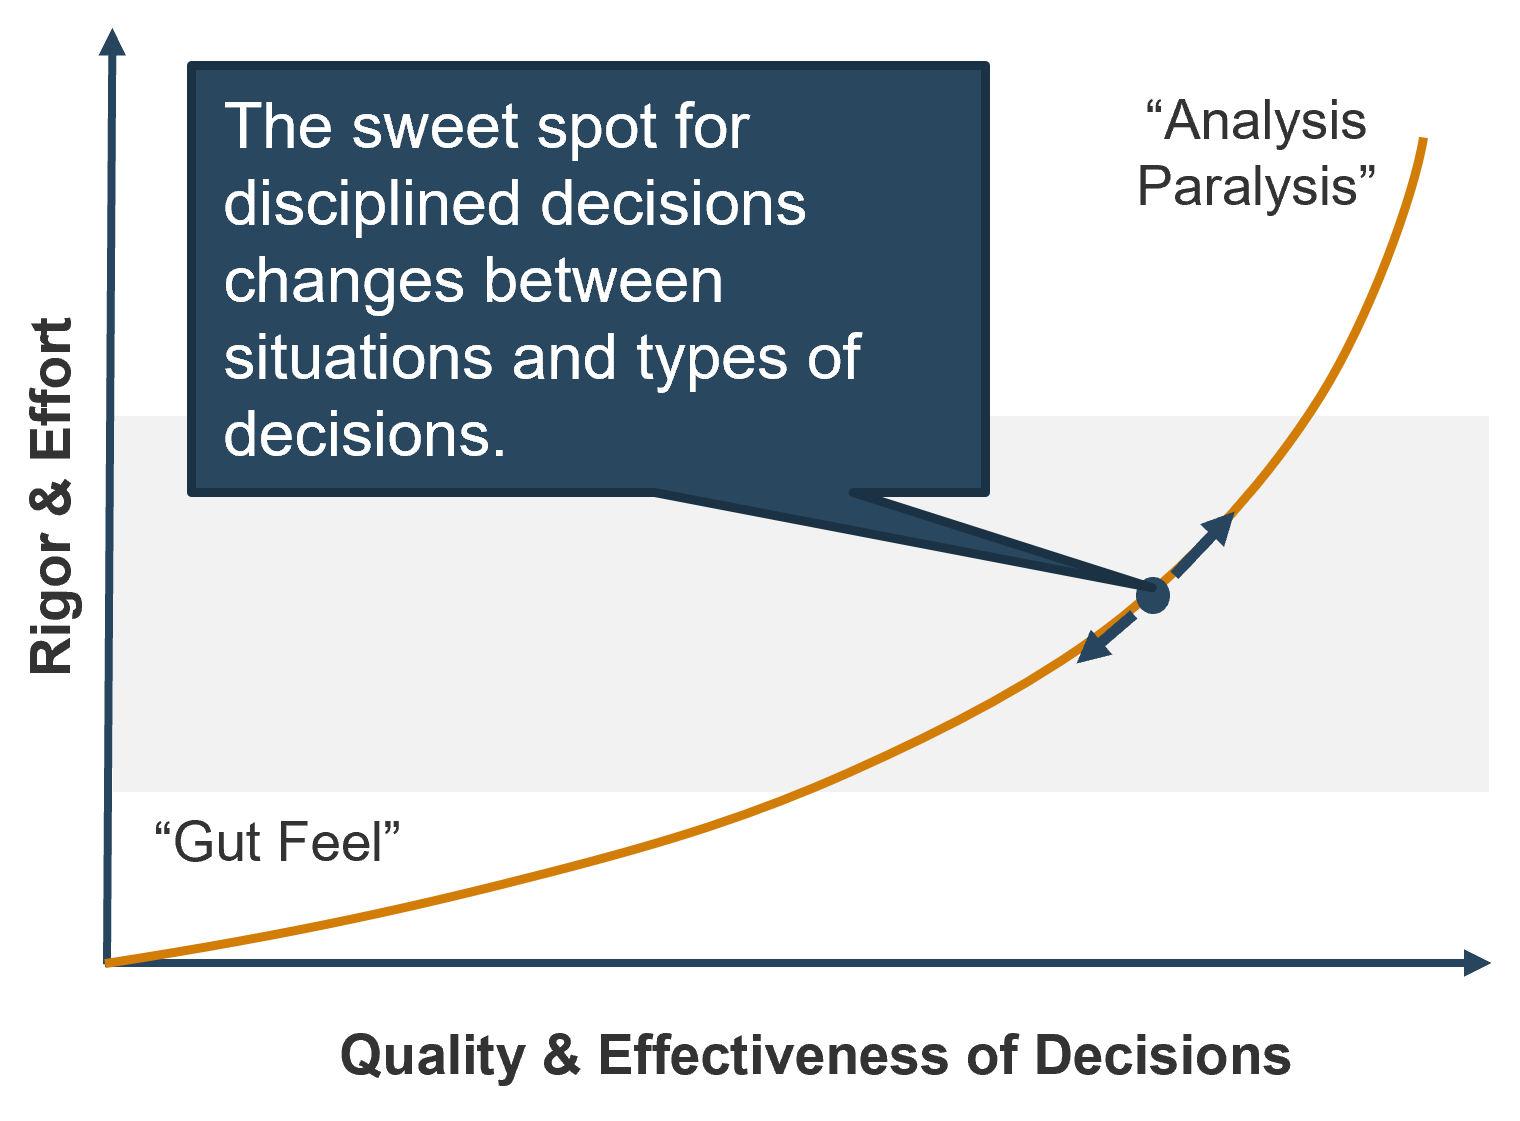 A graph is depicted to show the relationship between disciplined decision making and analysis paralysis. The sweet spot for disciplined decisions changes between situations and types of decisions.